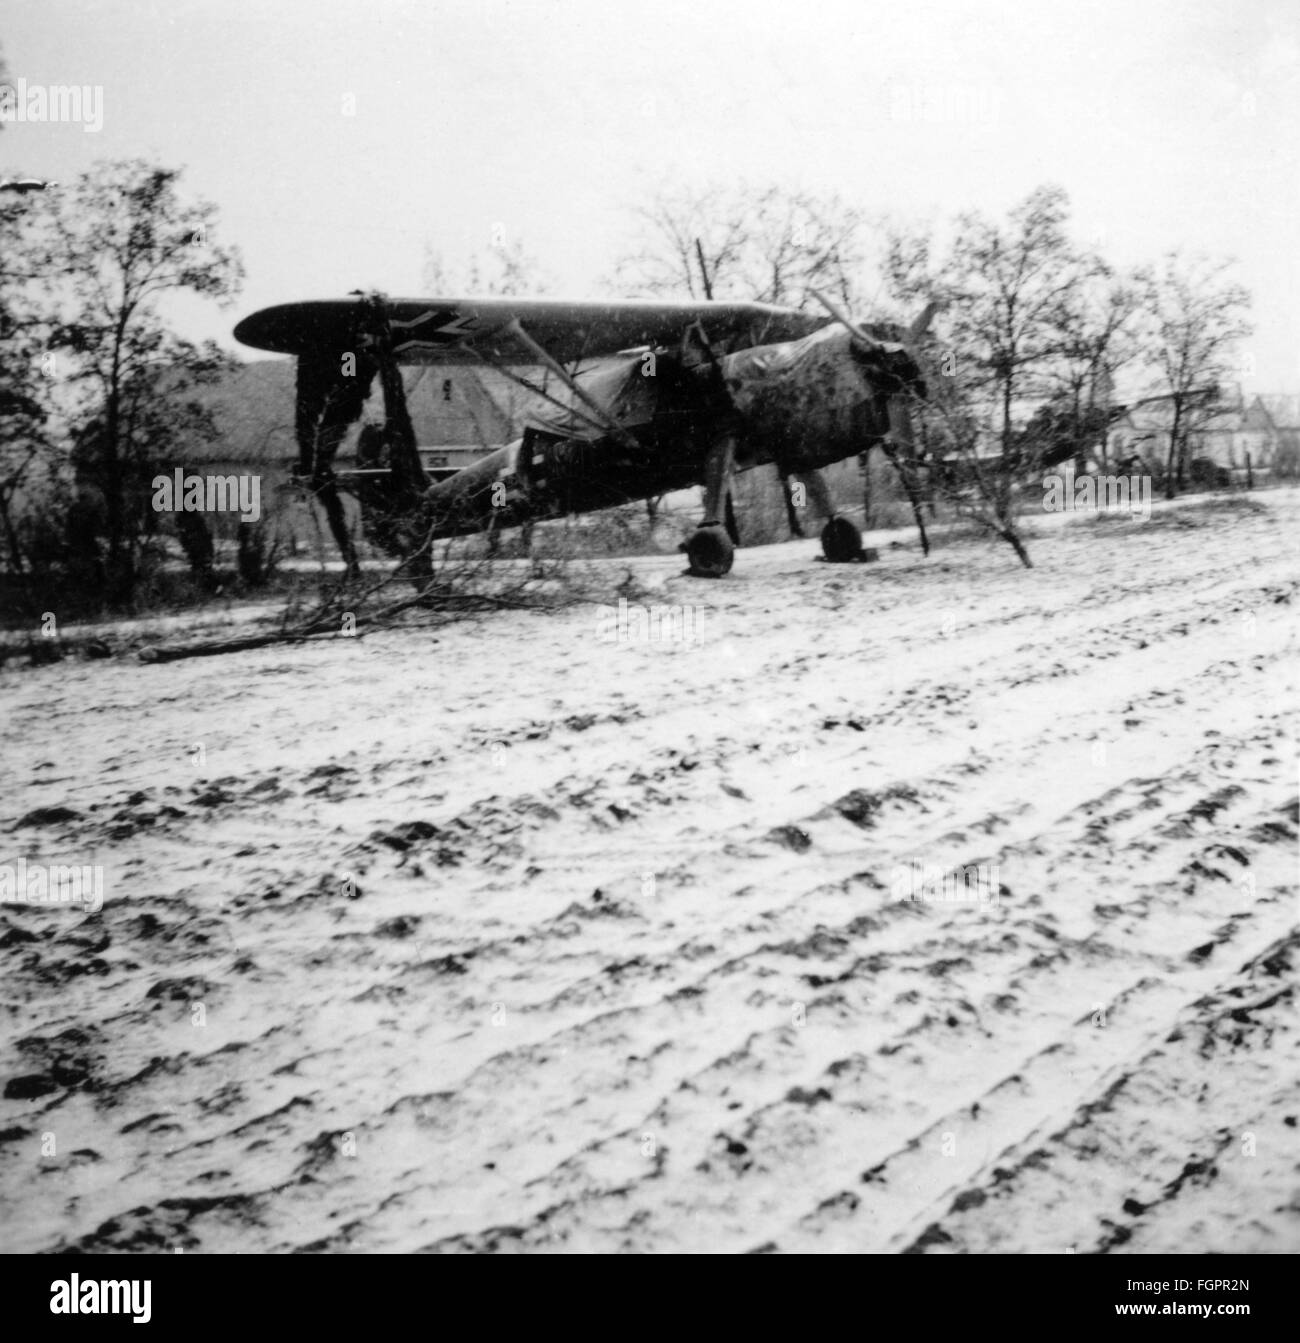 Second World War / WWII, Soviet Union, German Henschel Hs 126 close reconnaissance aircraft, army group South, 1942, Additional-Rights-Clearences-Not Available Stock Photo